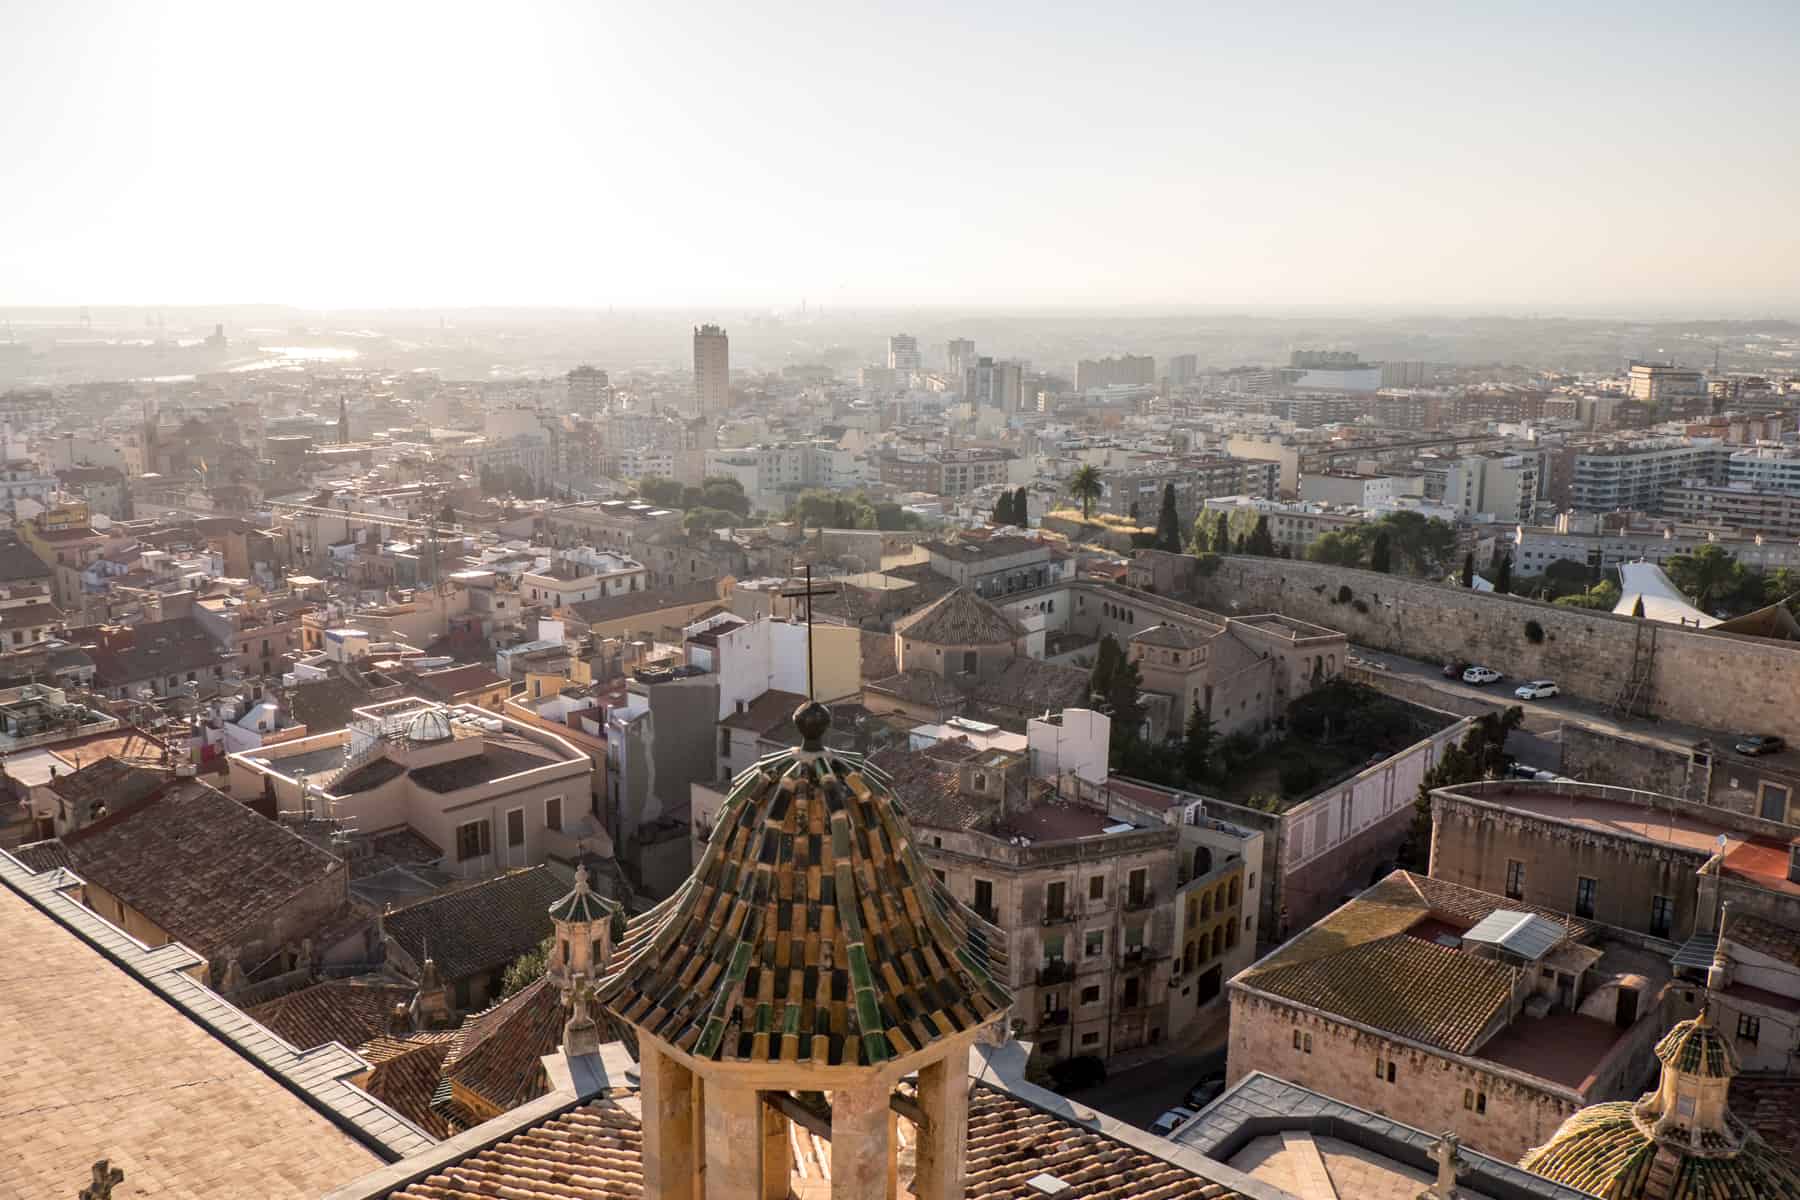 An arial view of the golden structures, dombs and roofs of Tarragona, Spain, in a golden glow from afternoon sun